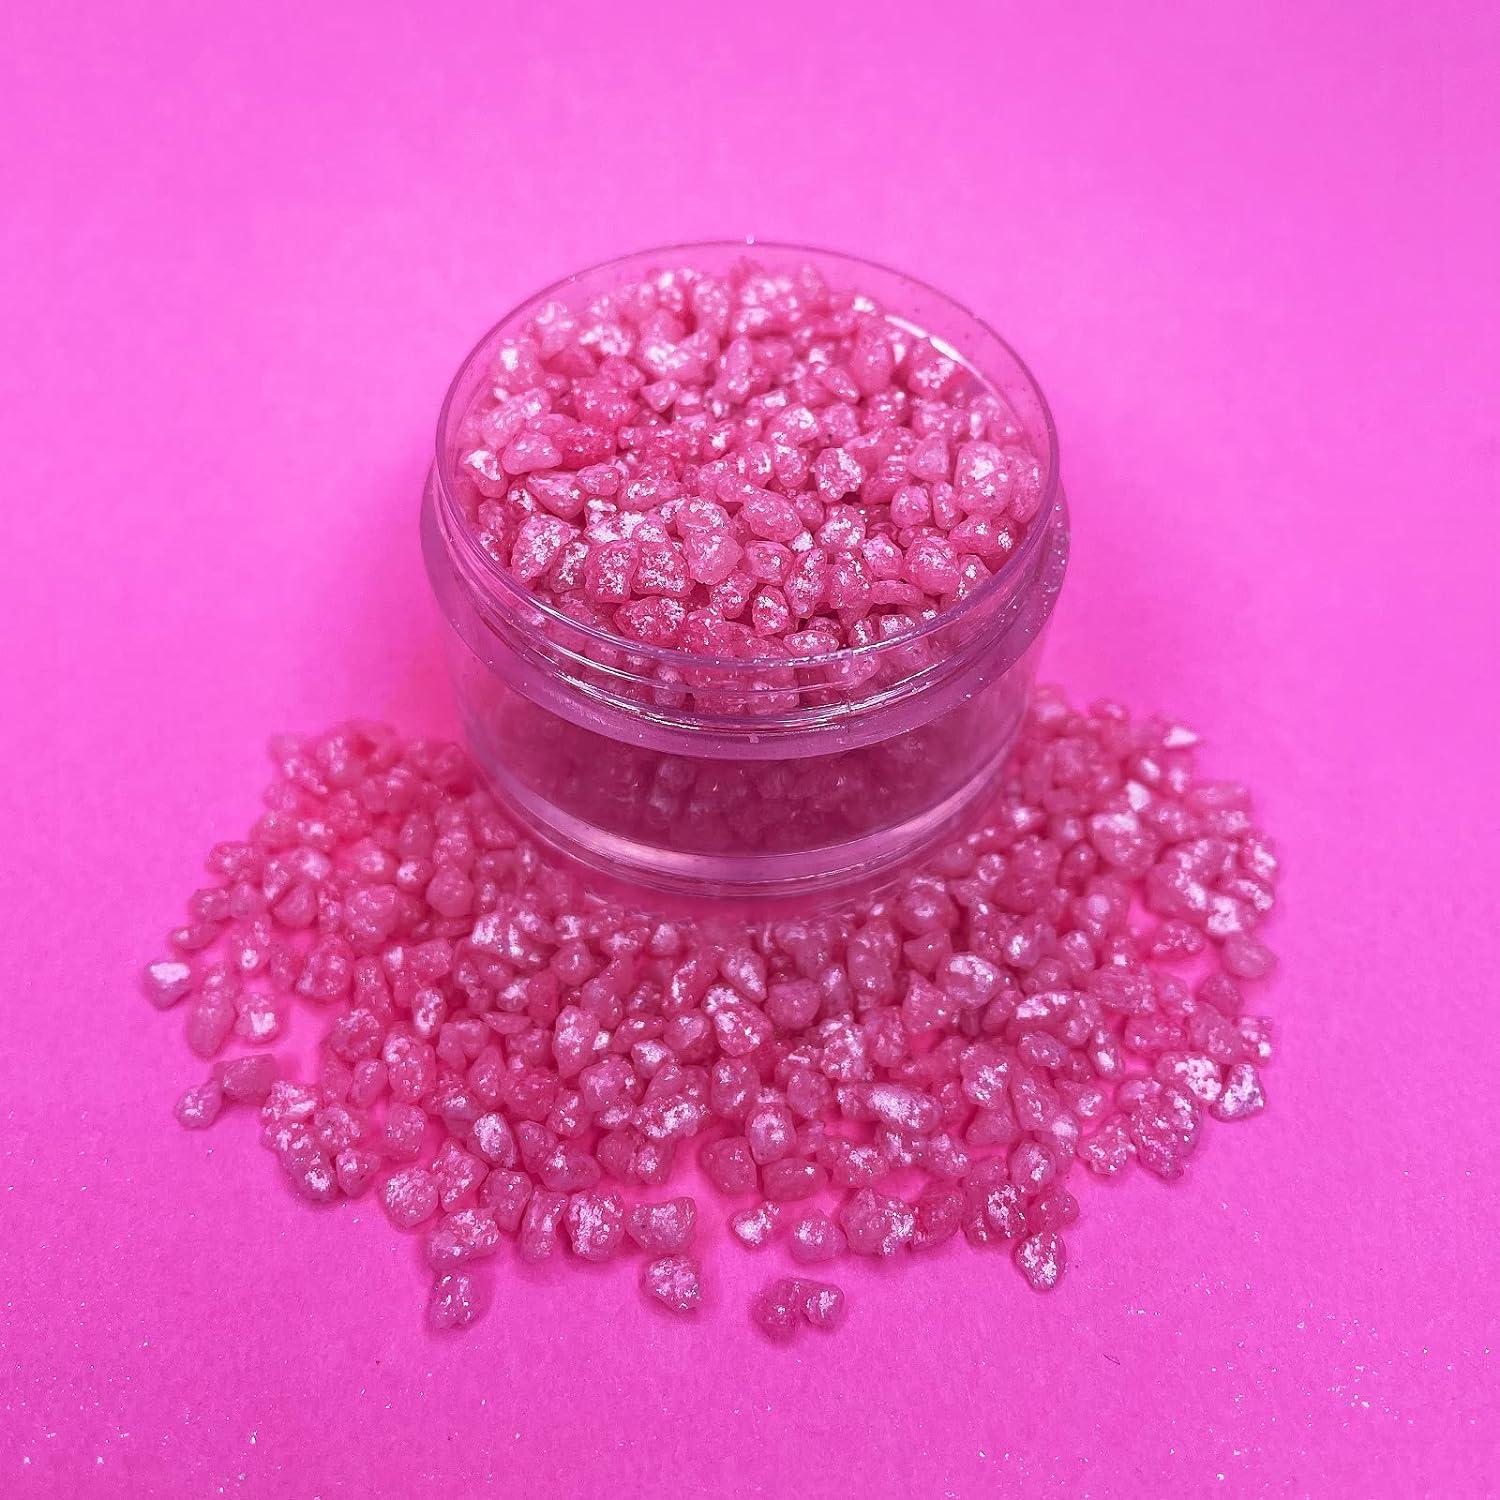 Edible Pink Glitter Coated Sugar Crystals 200g - Glimmer Pearl Sugar Nibs  for Baking - Sparkling Sugar Crystals for Cakes and Cupcakes Decoration -  Shimmer Shiny Coarse Sugar Pearls and Sprinkles